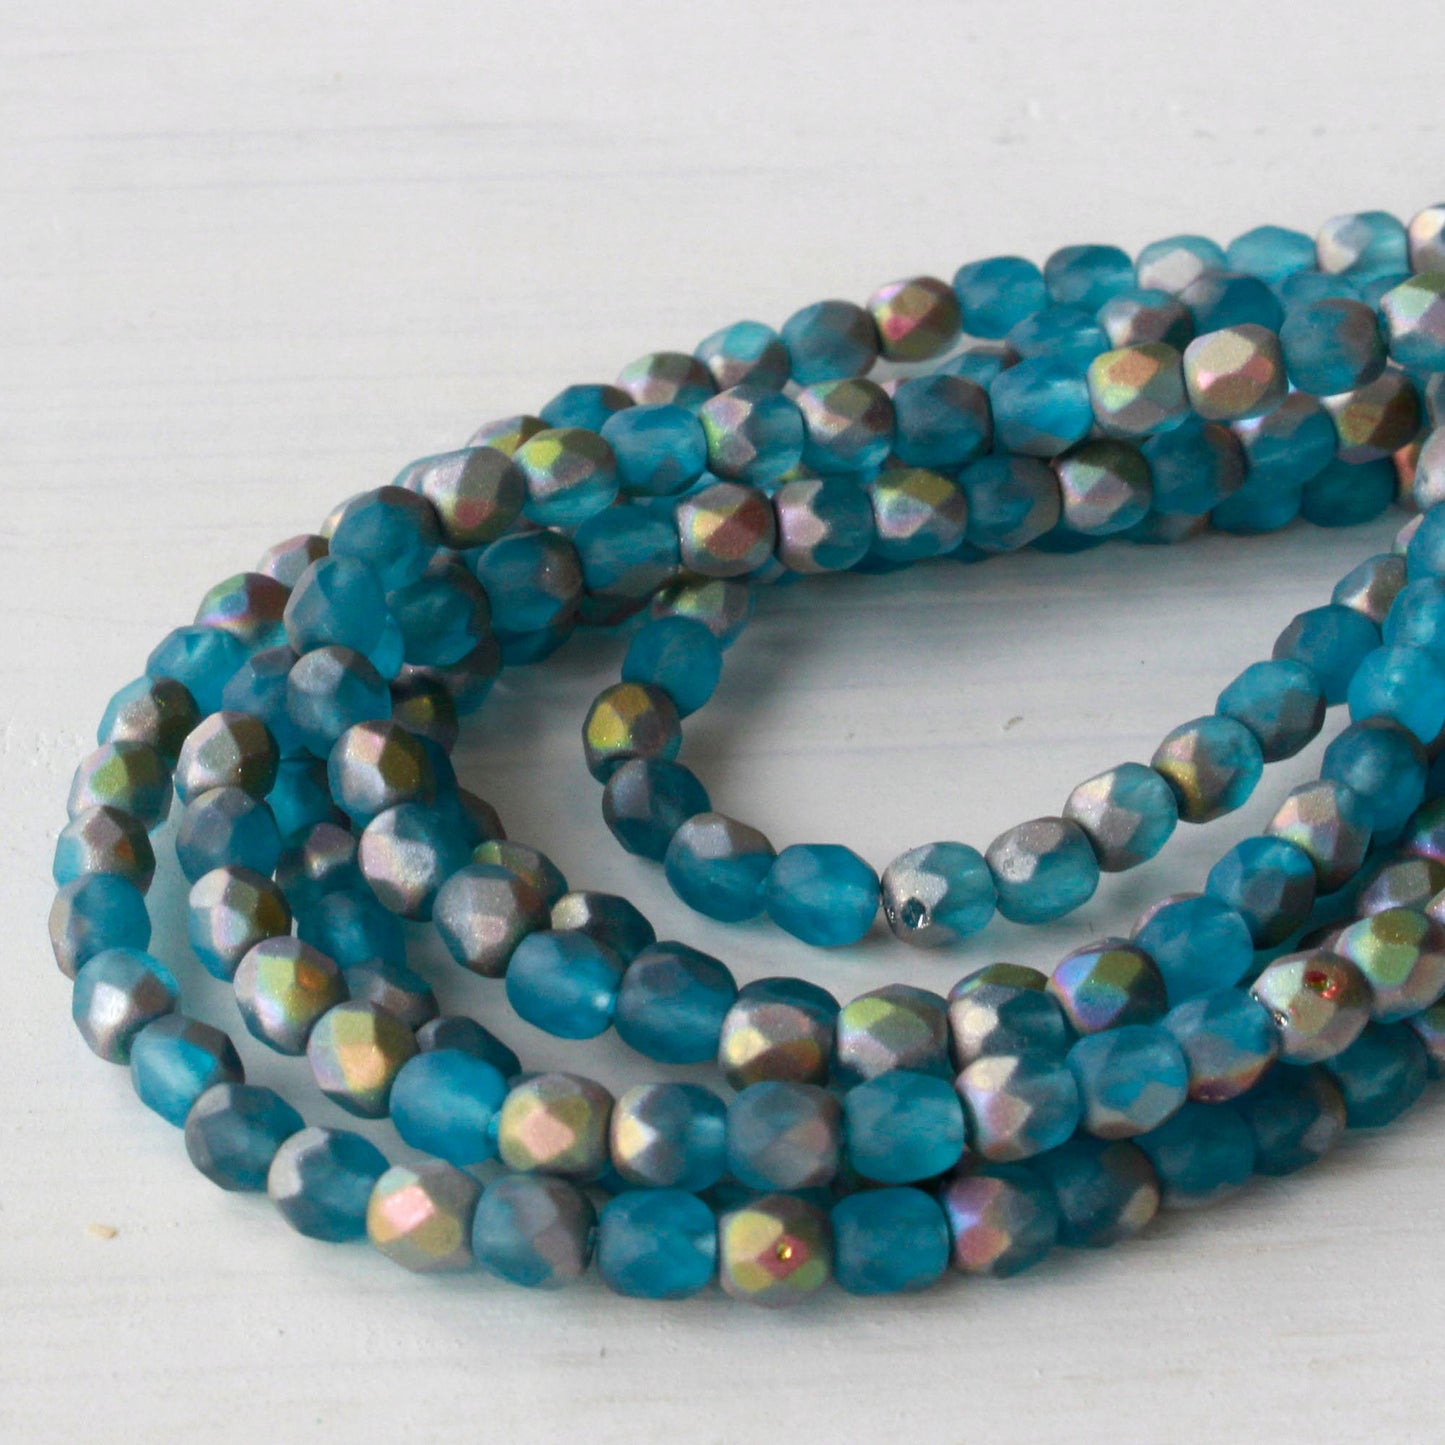 4mm Round Firepolished Beads - Matte Teal with Matte Silver Coat - 50 Beads